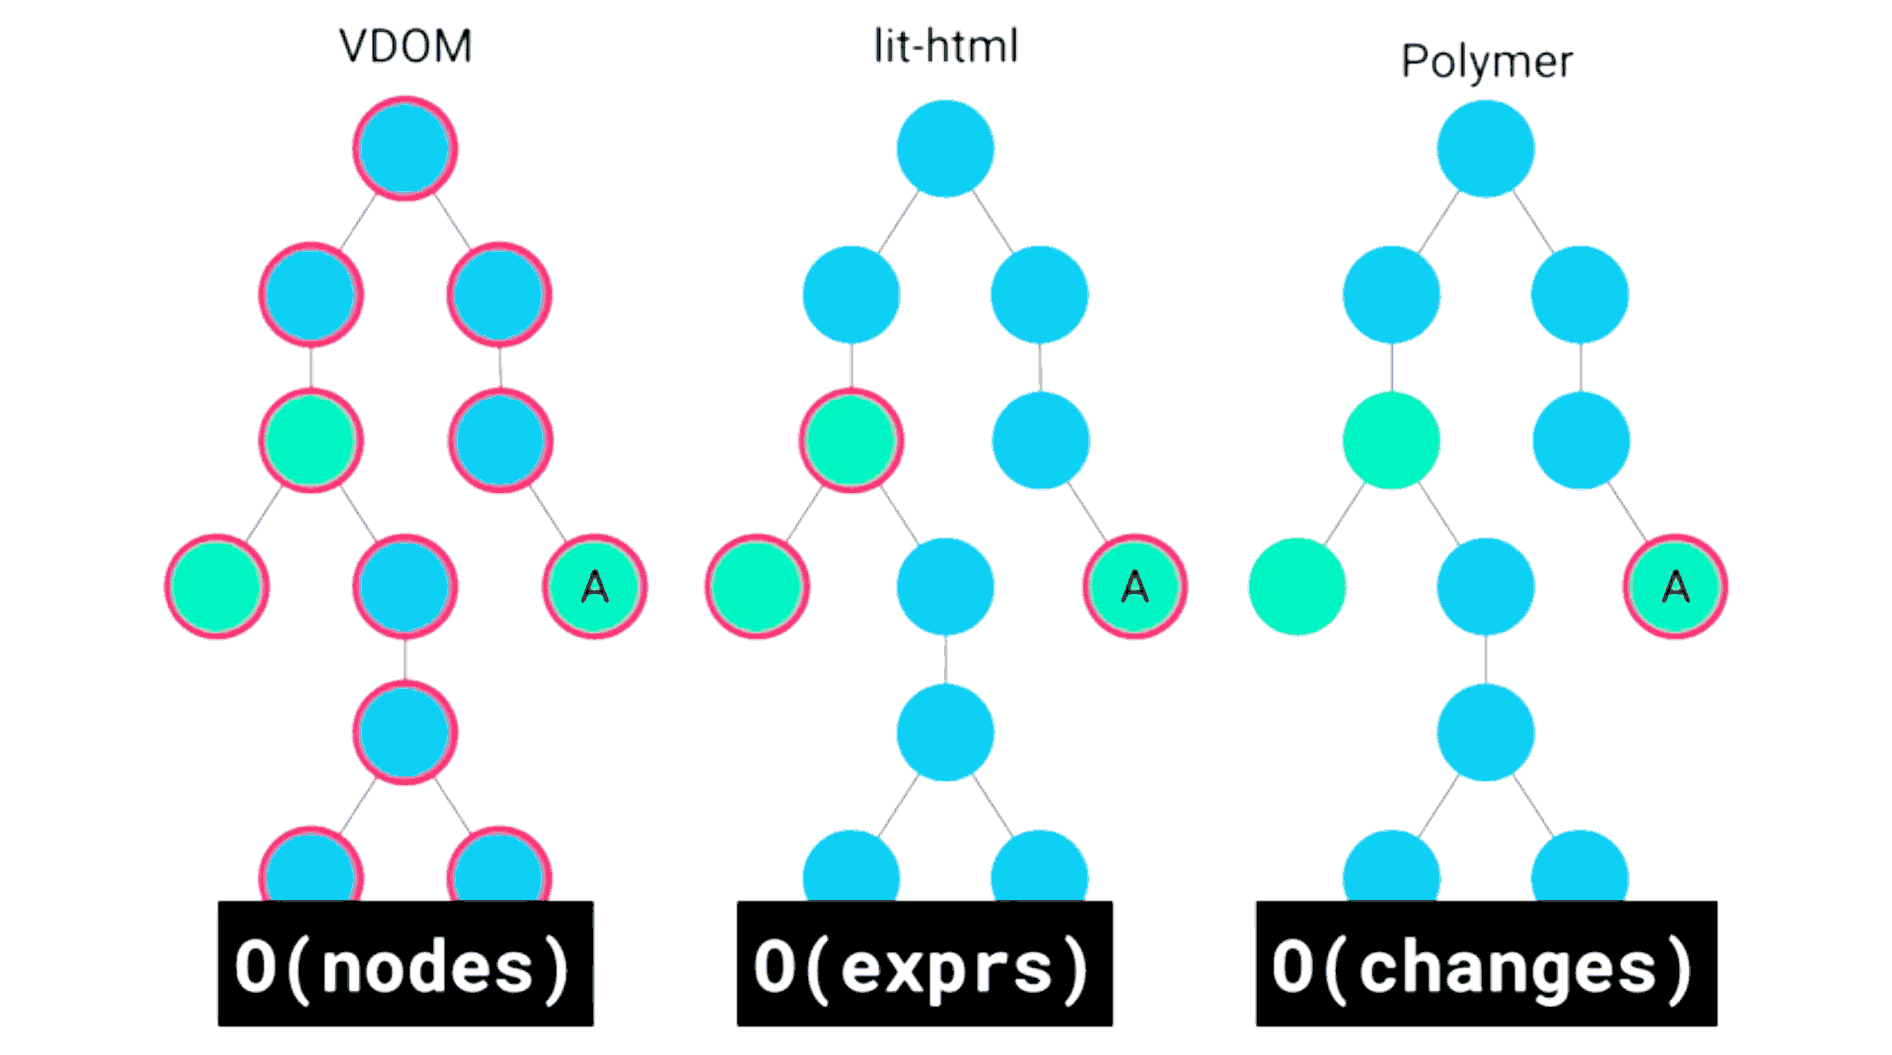 Illustration of rendering paths of VDOM (React), lit-html and HTML Templates (Polymer)